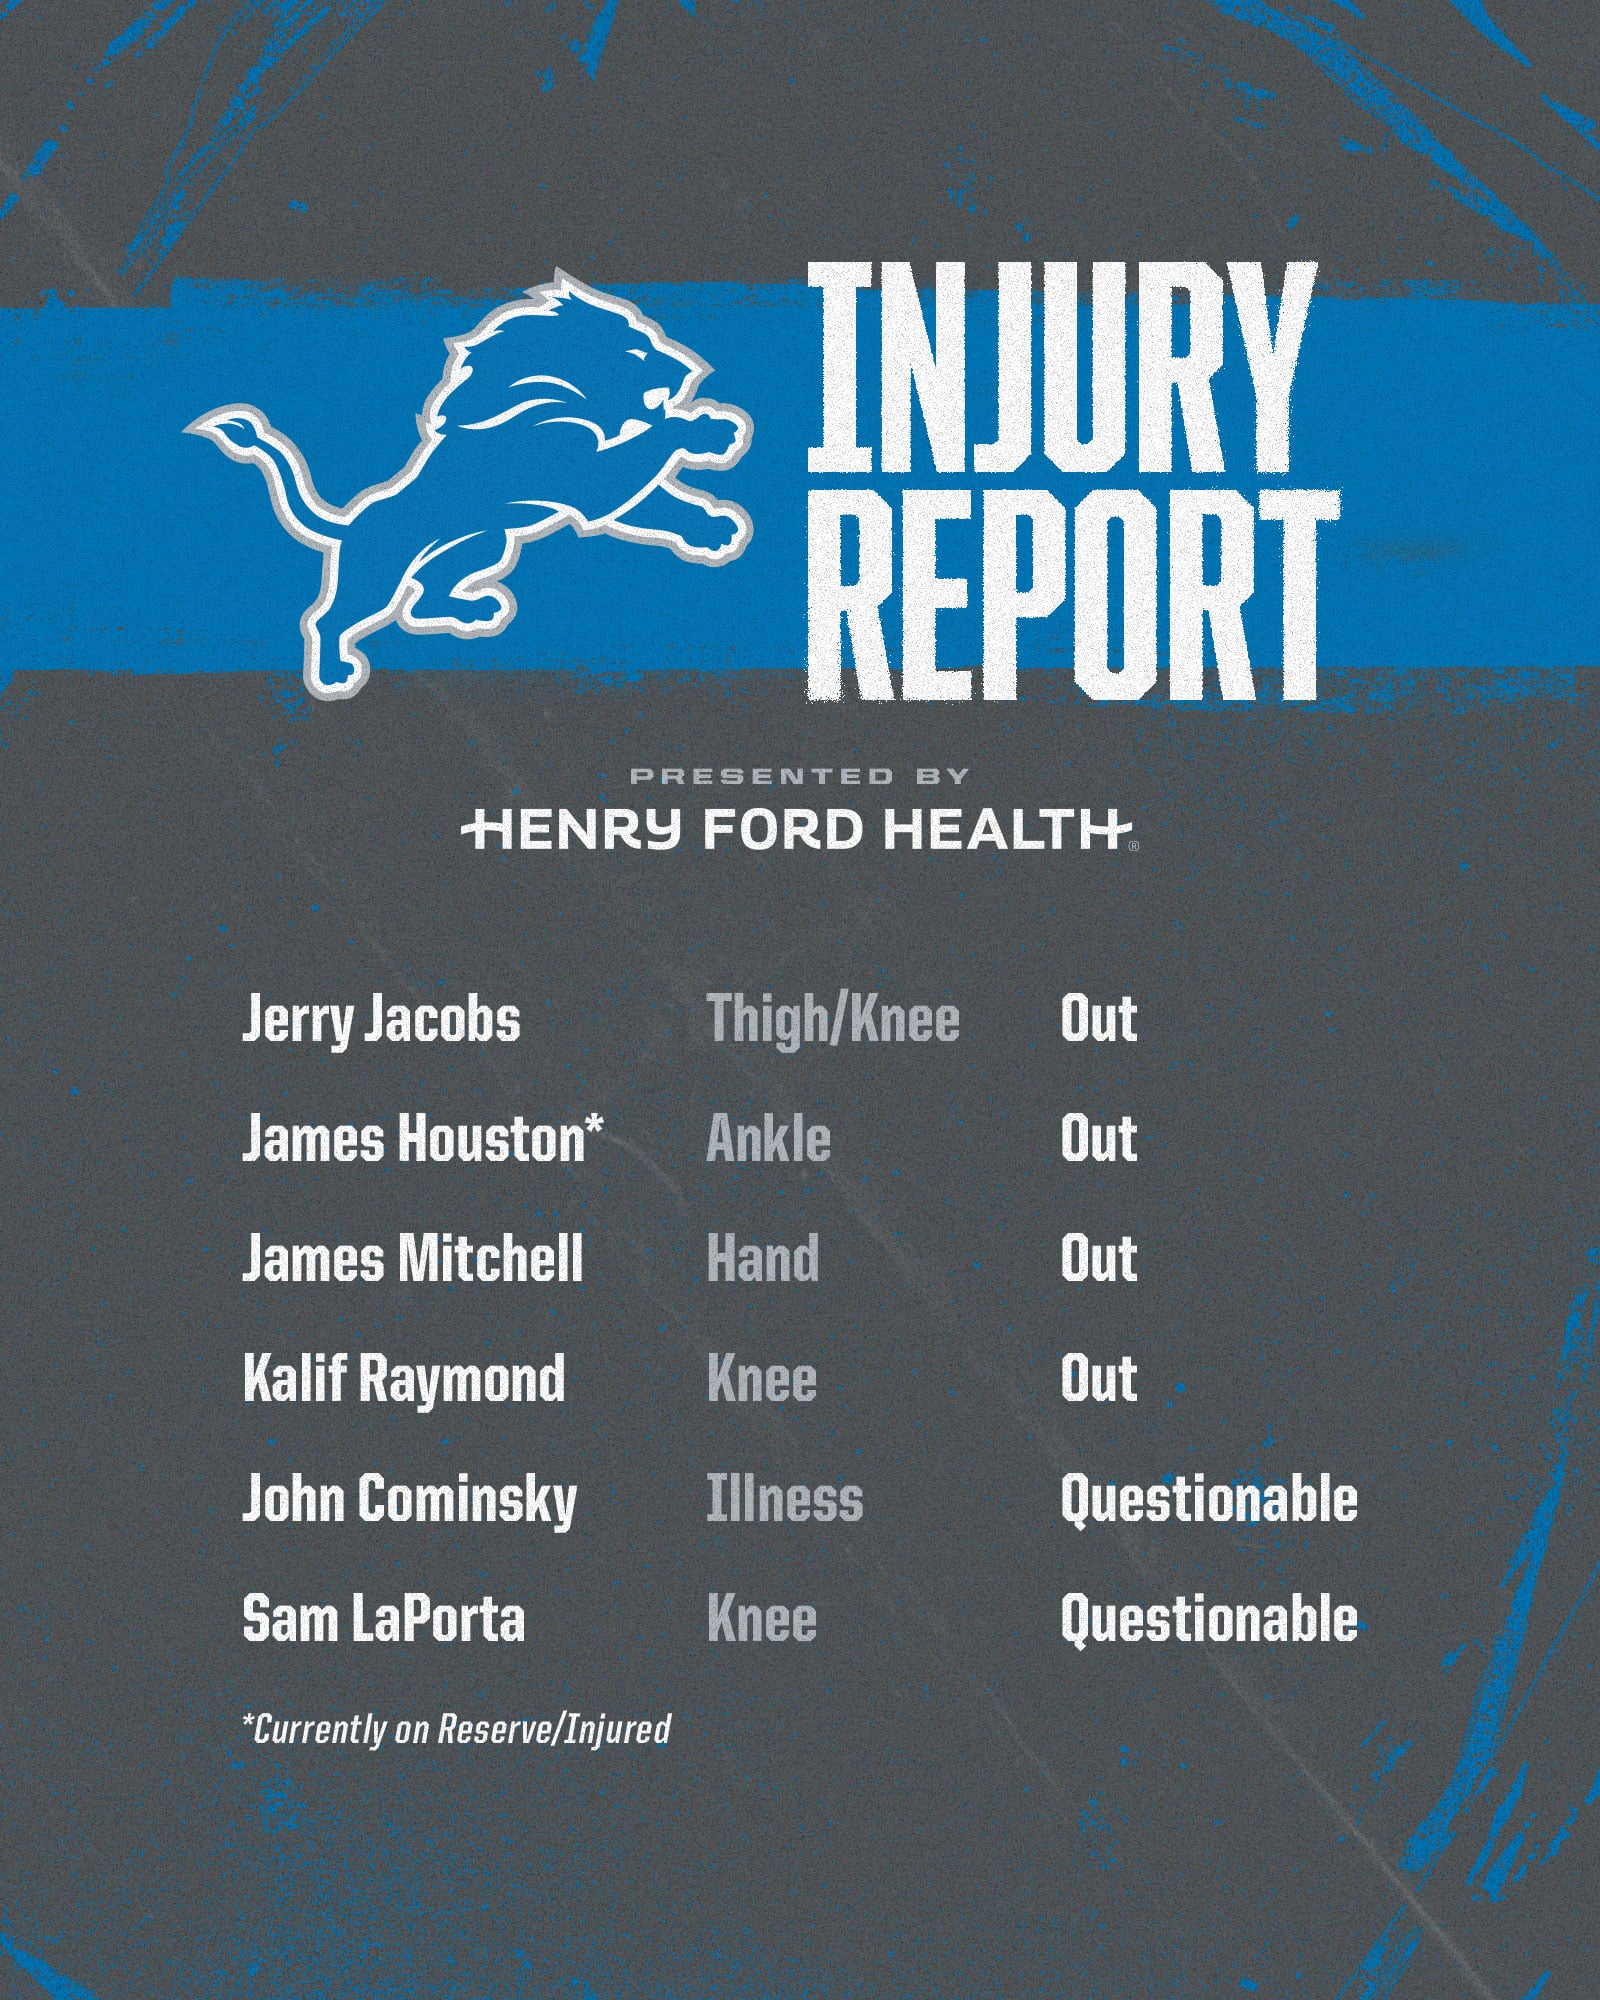 Who is on the Injury Report?